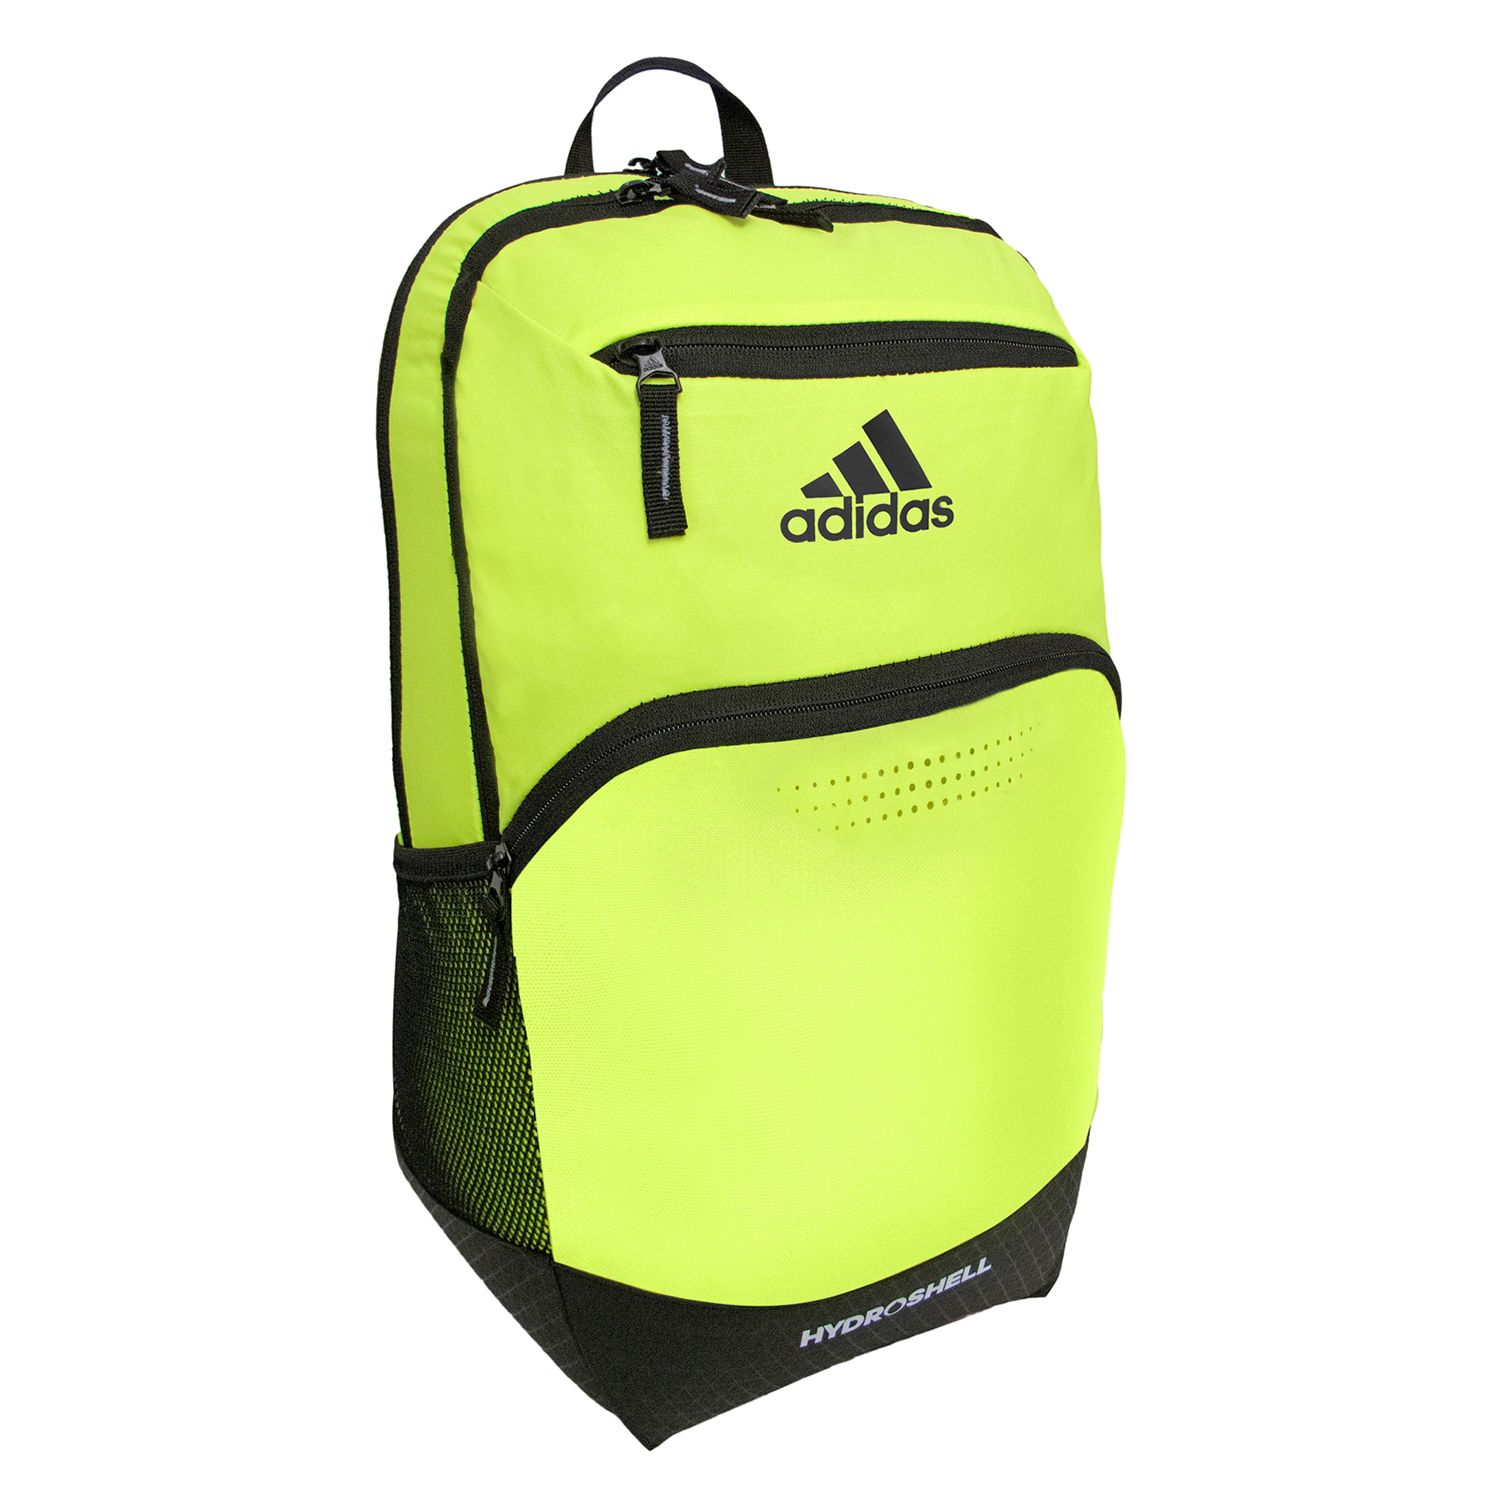 adidas Rumble 13-inch Laptop Backpack